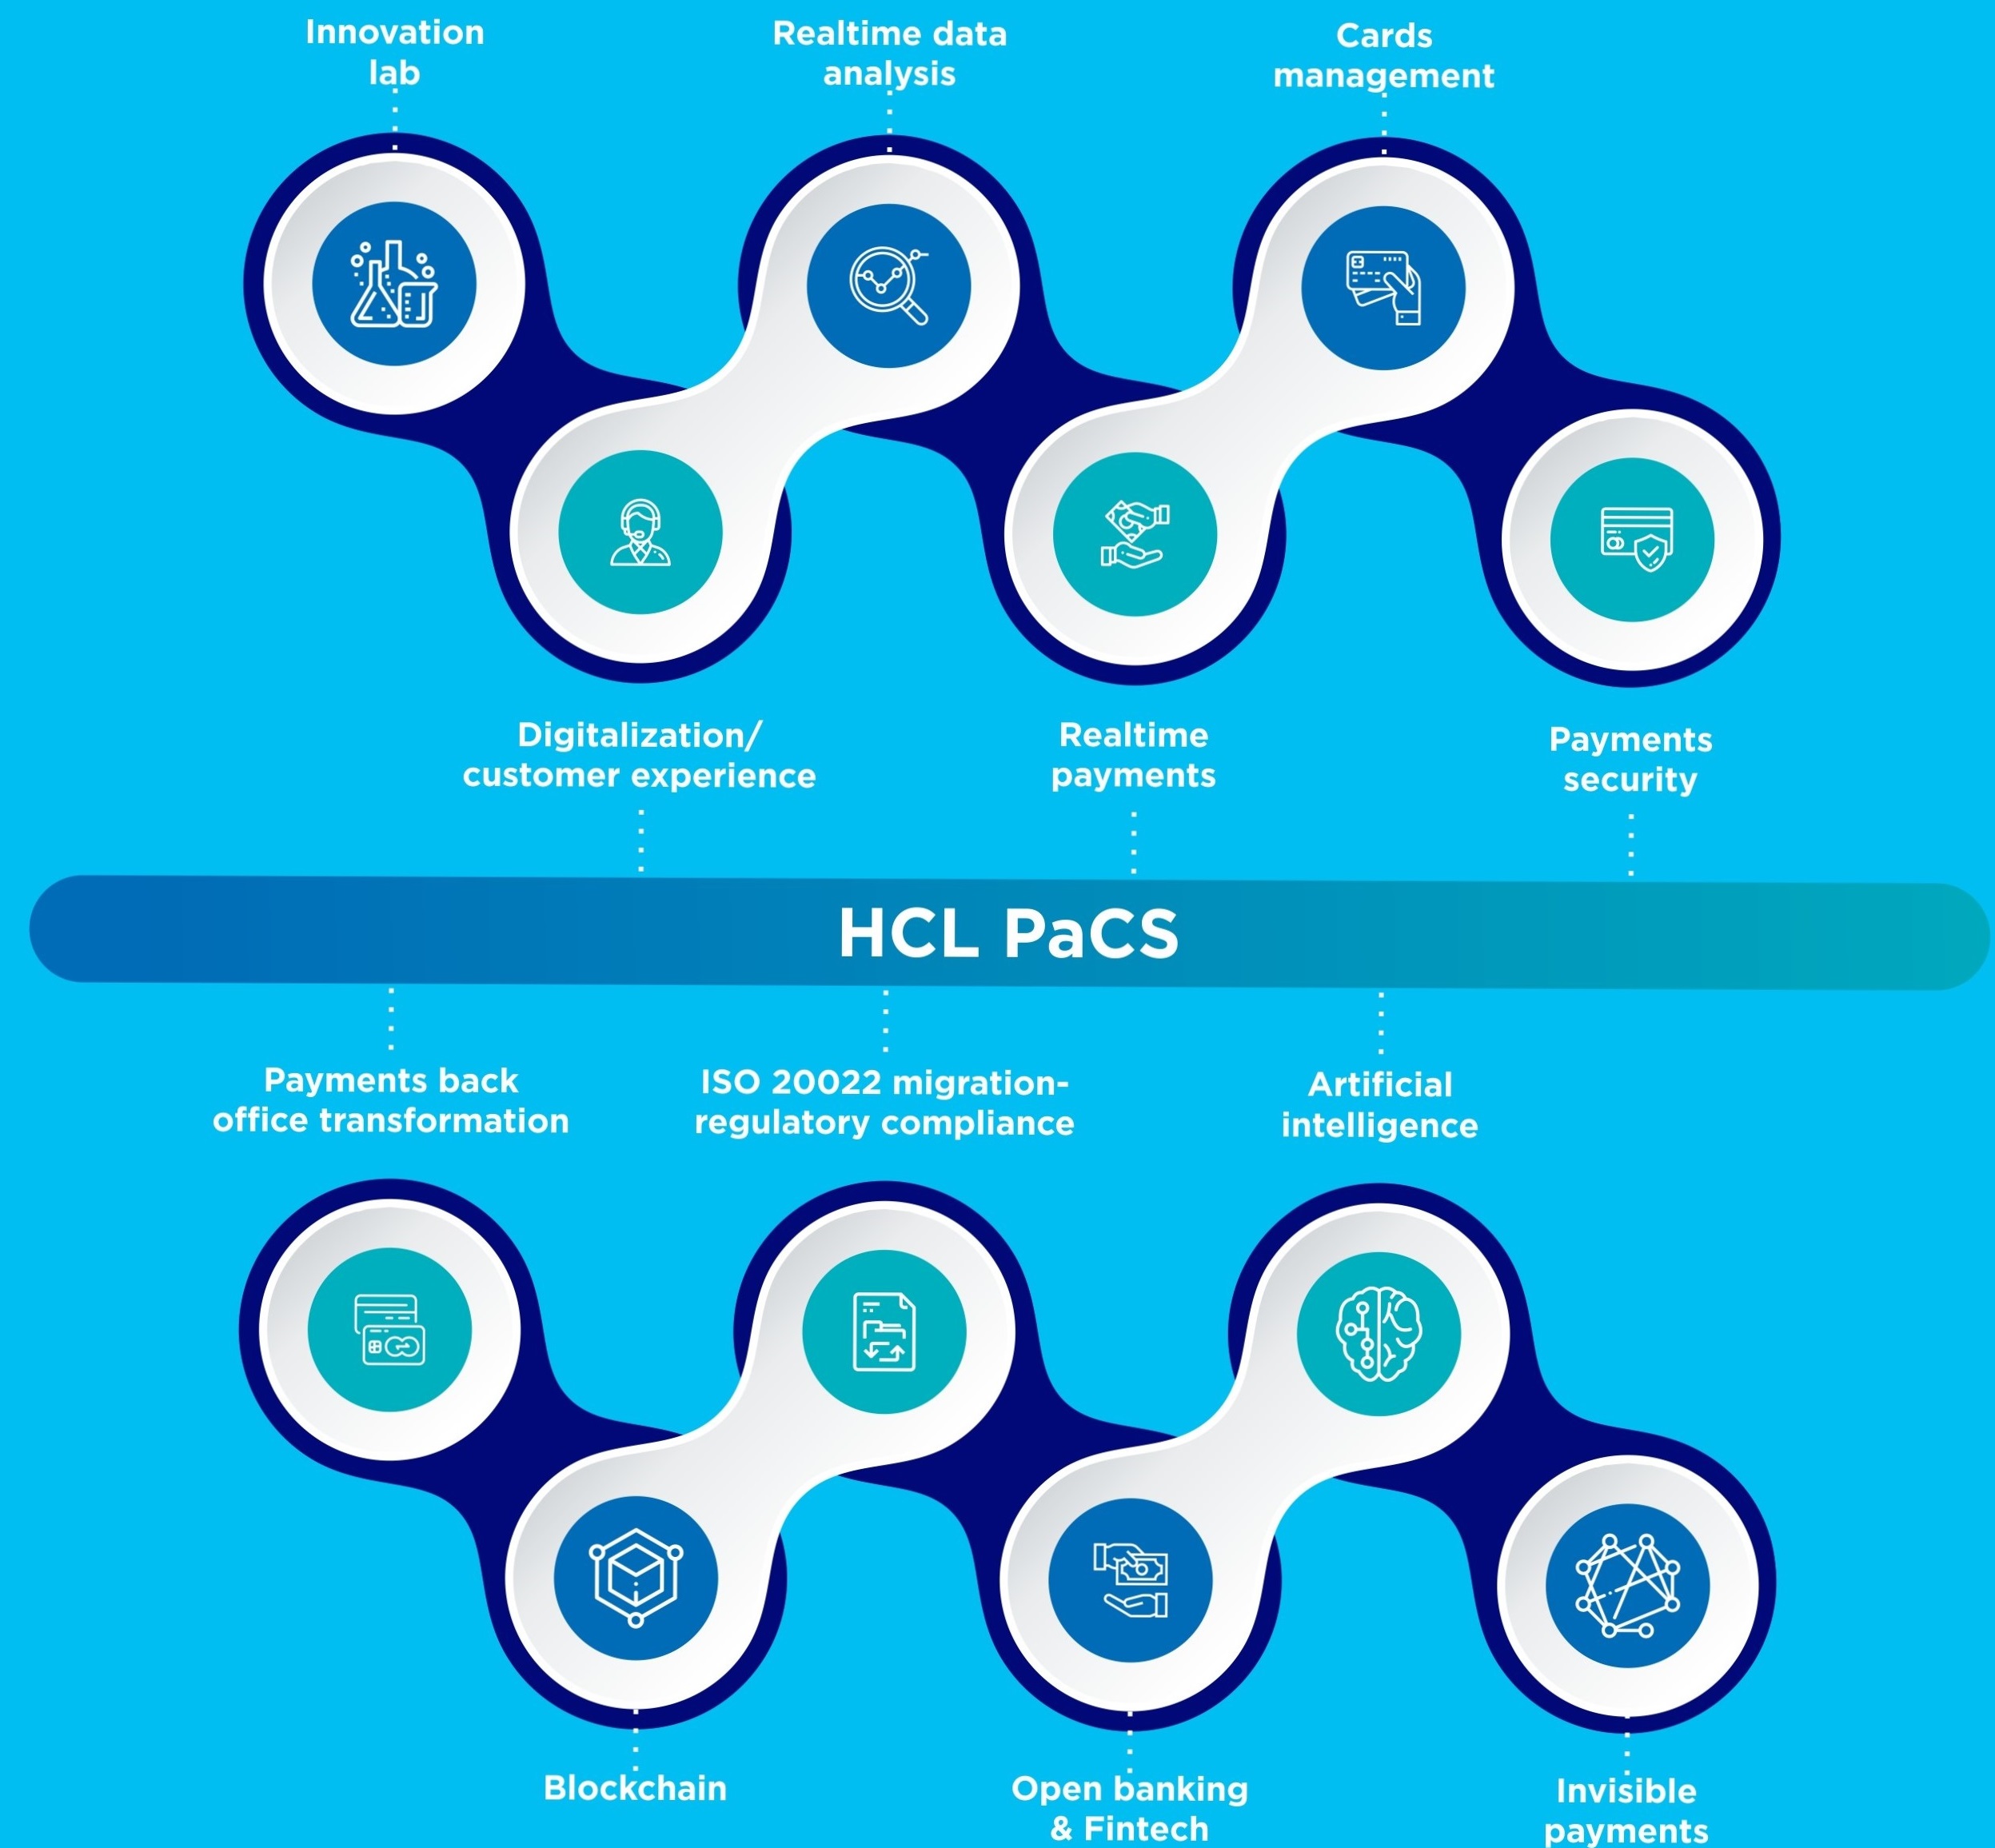 HCL PaCS (Payment & Card Solutions)